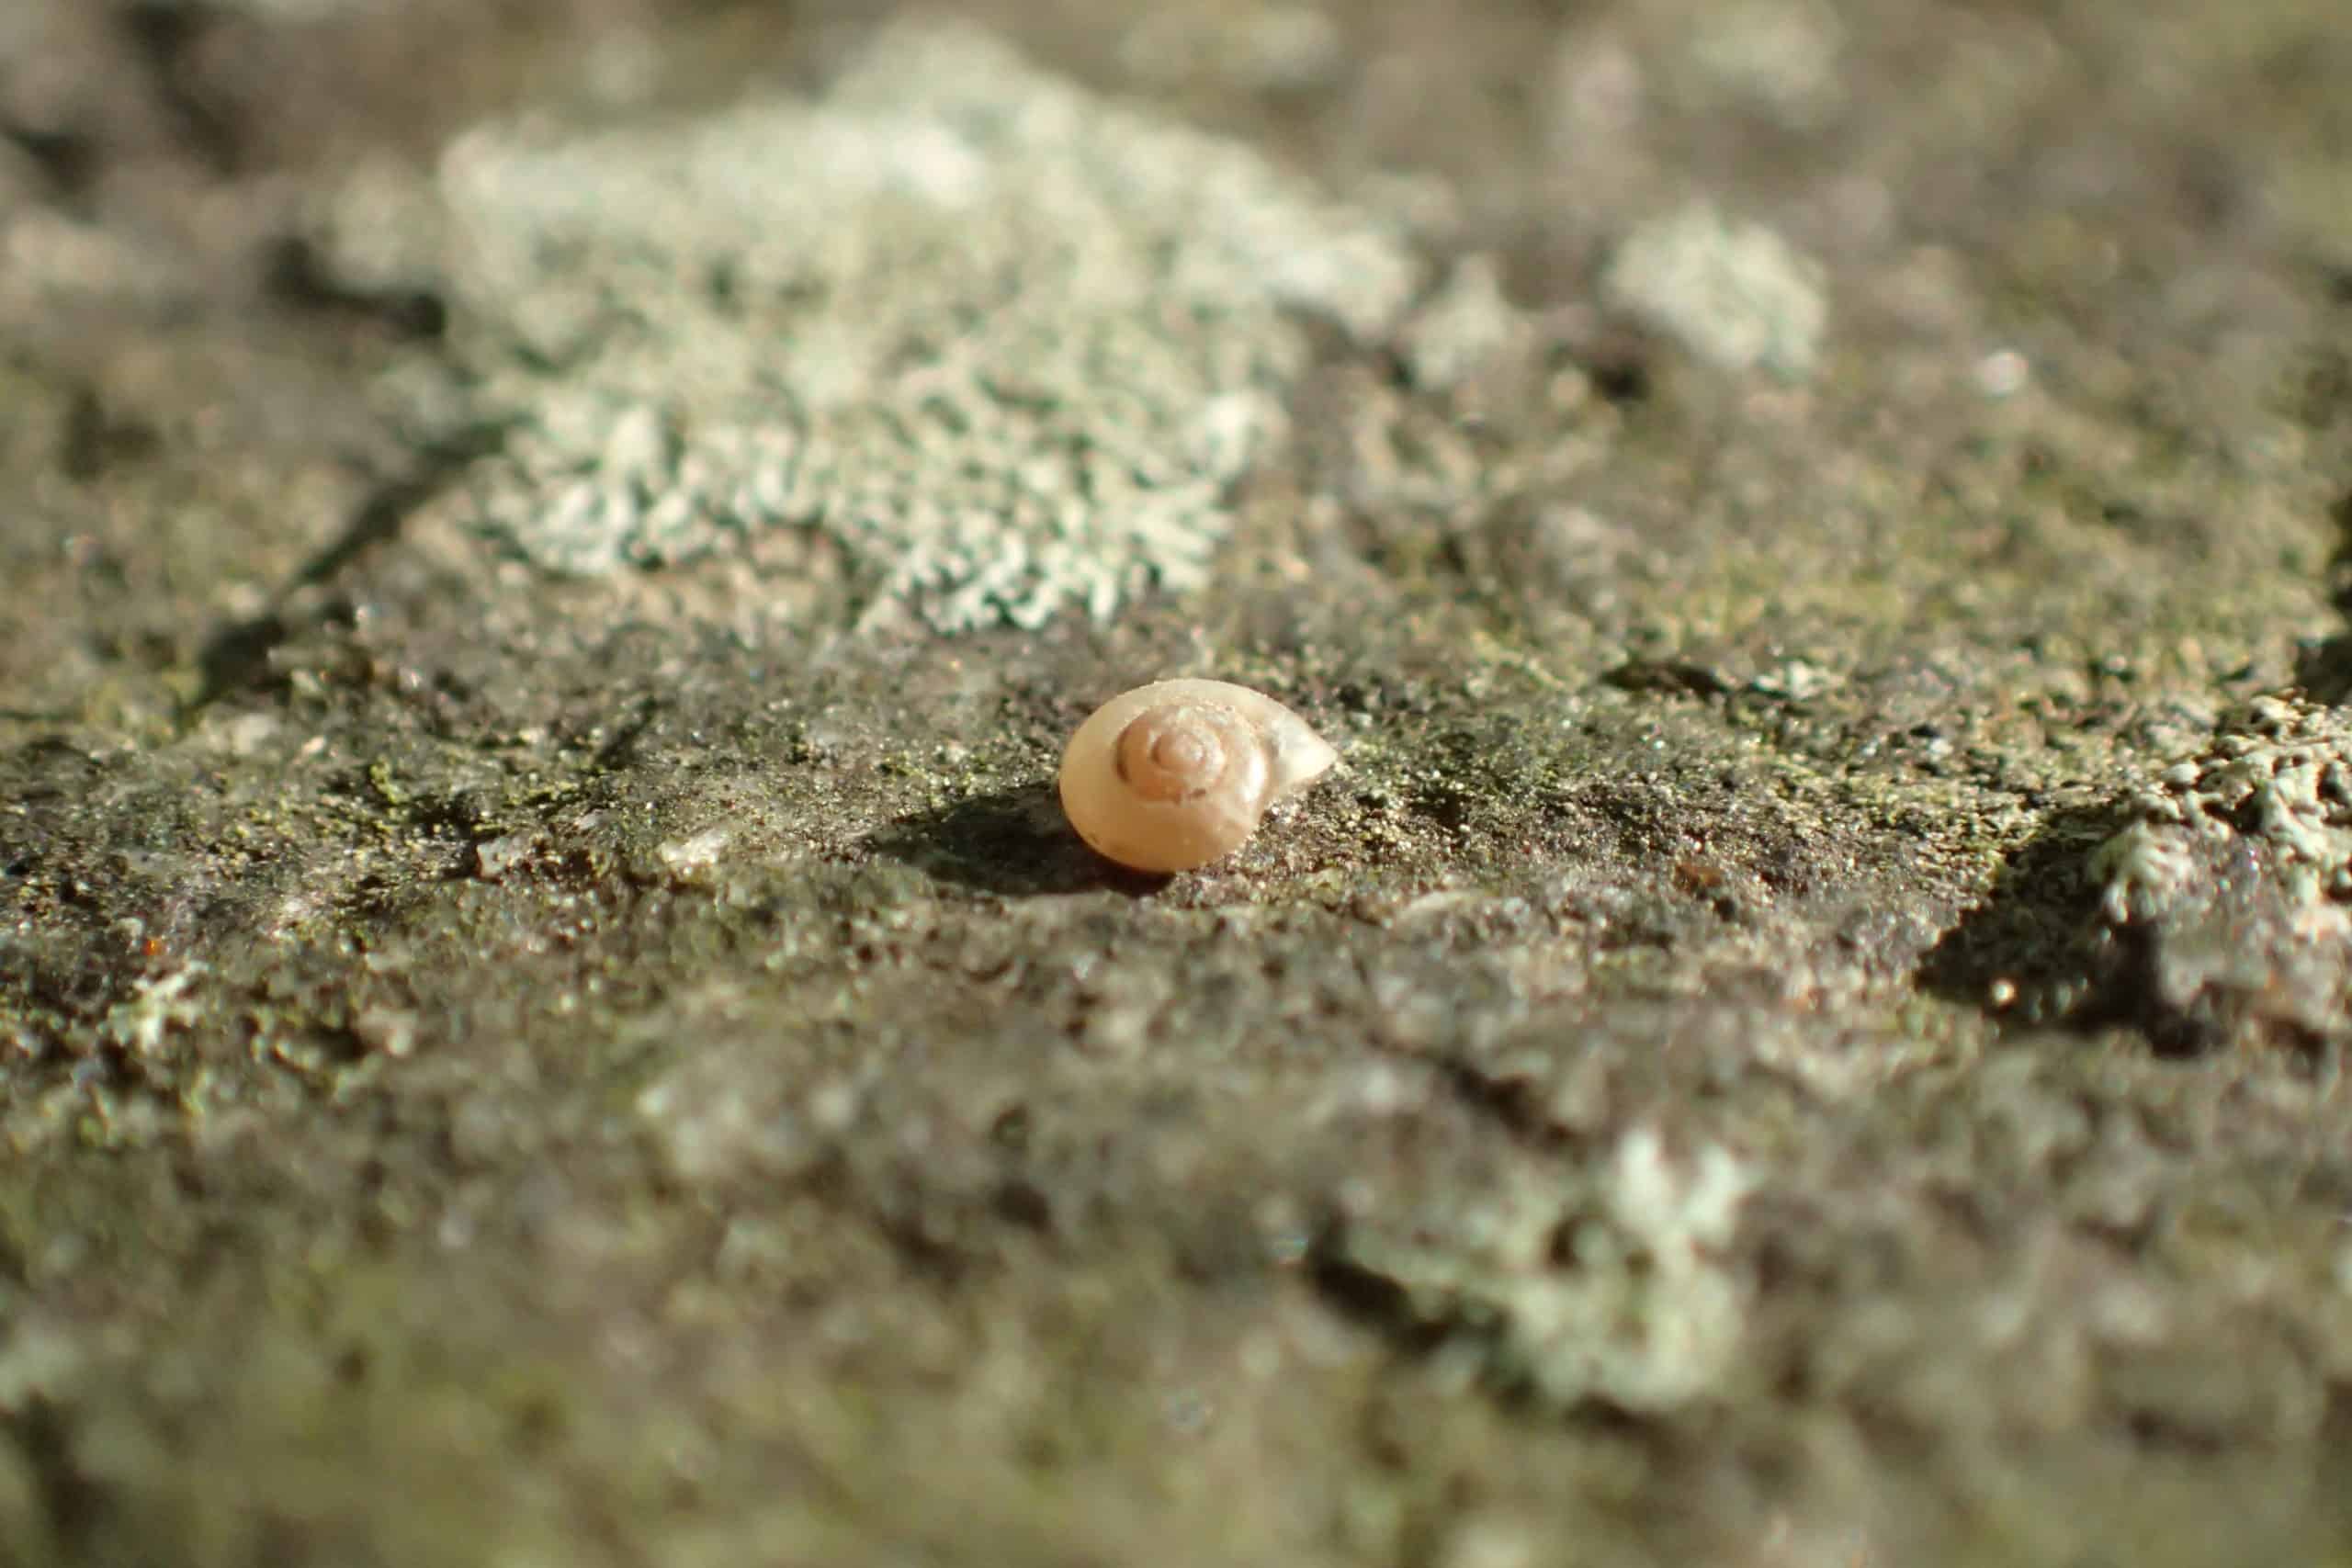 Tan snail shell with serial patter rests on rock